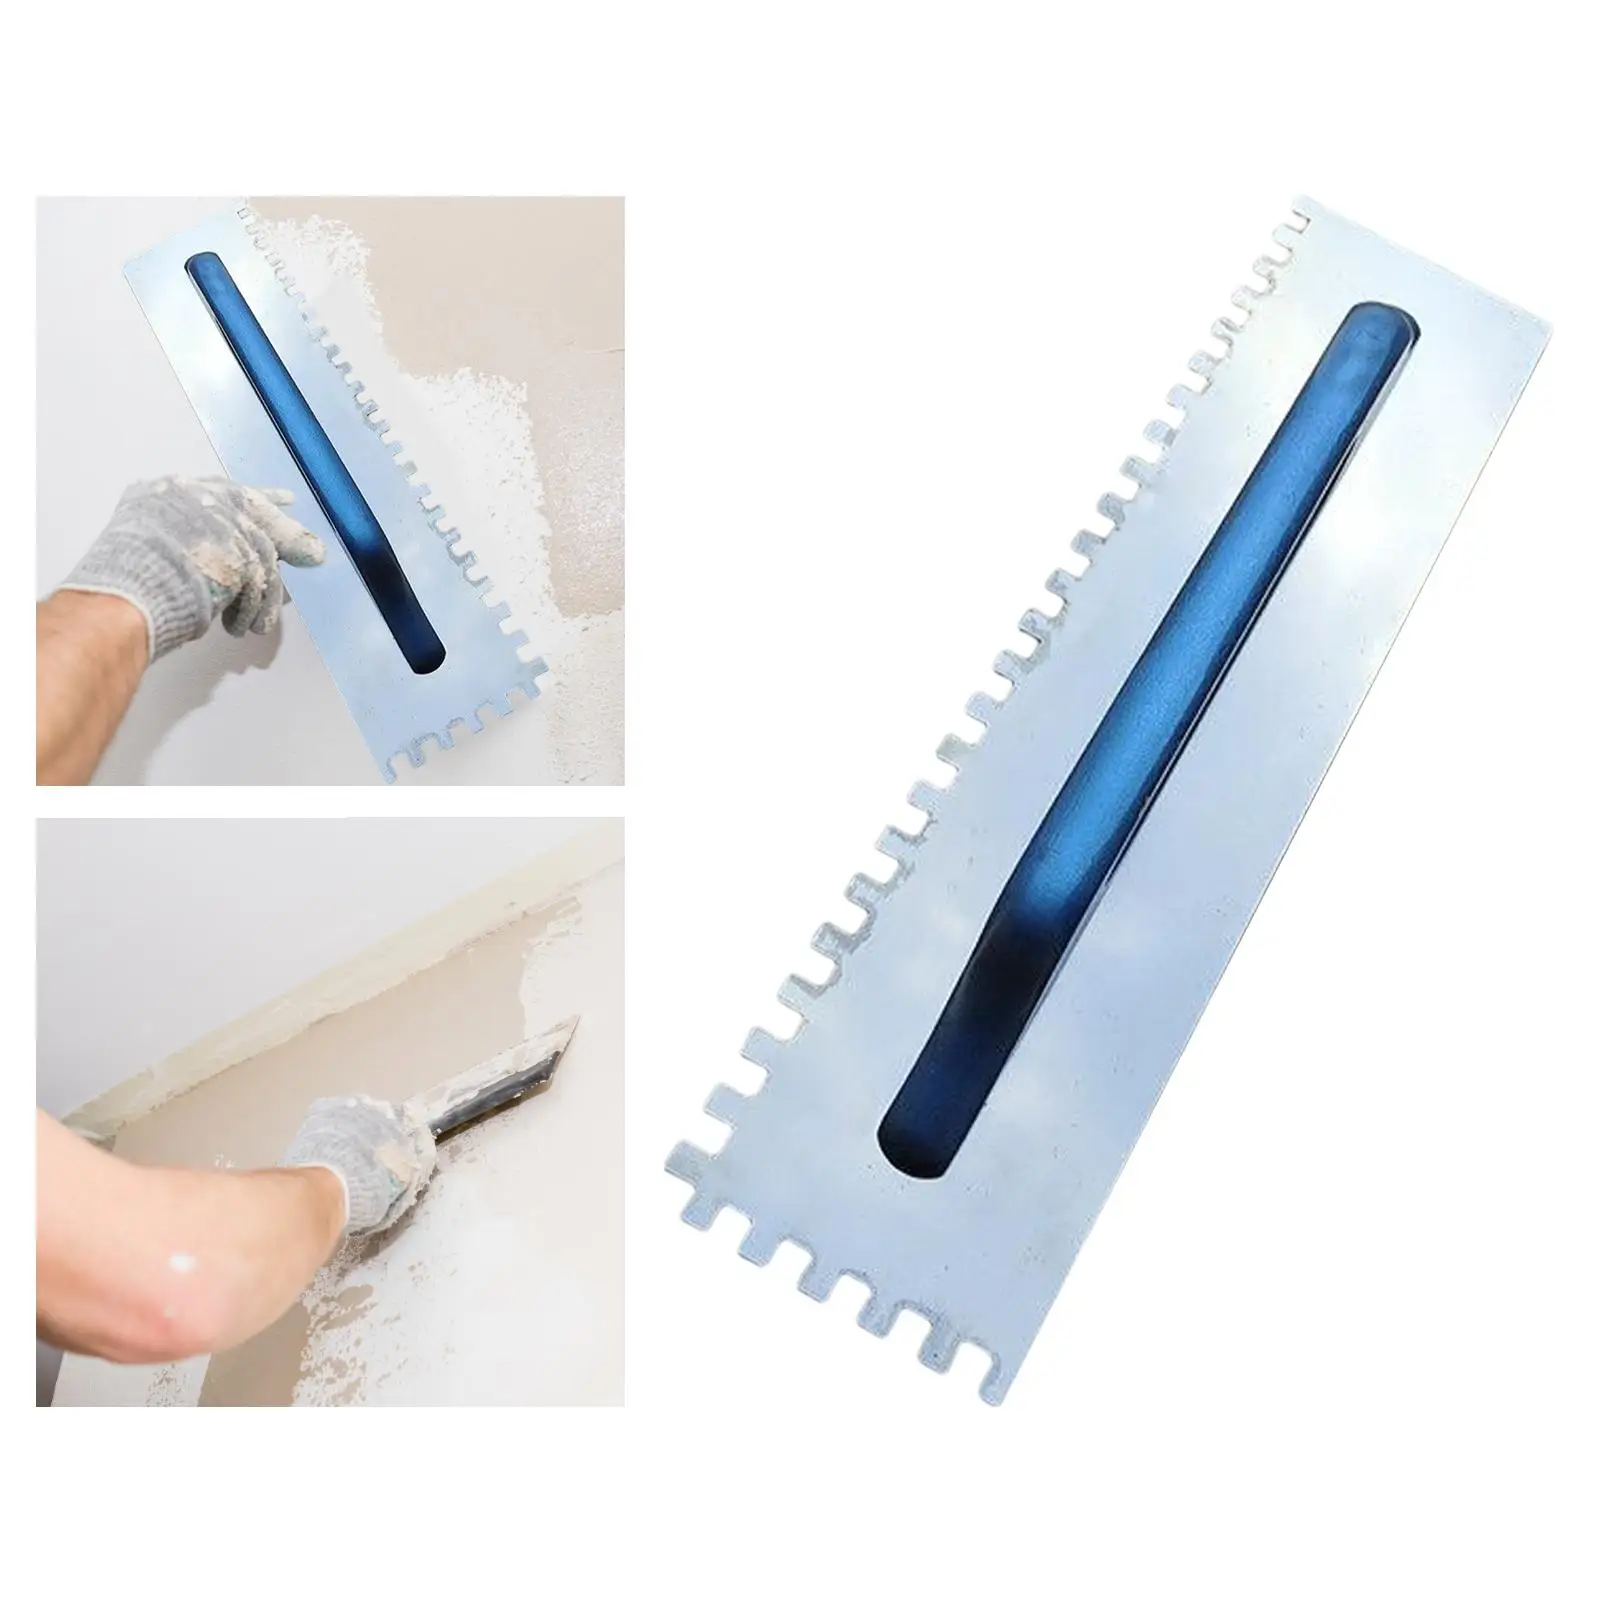 Stainless Steel Drywall Smoothing Spatula Tools Putty Tool Plastering Skimming